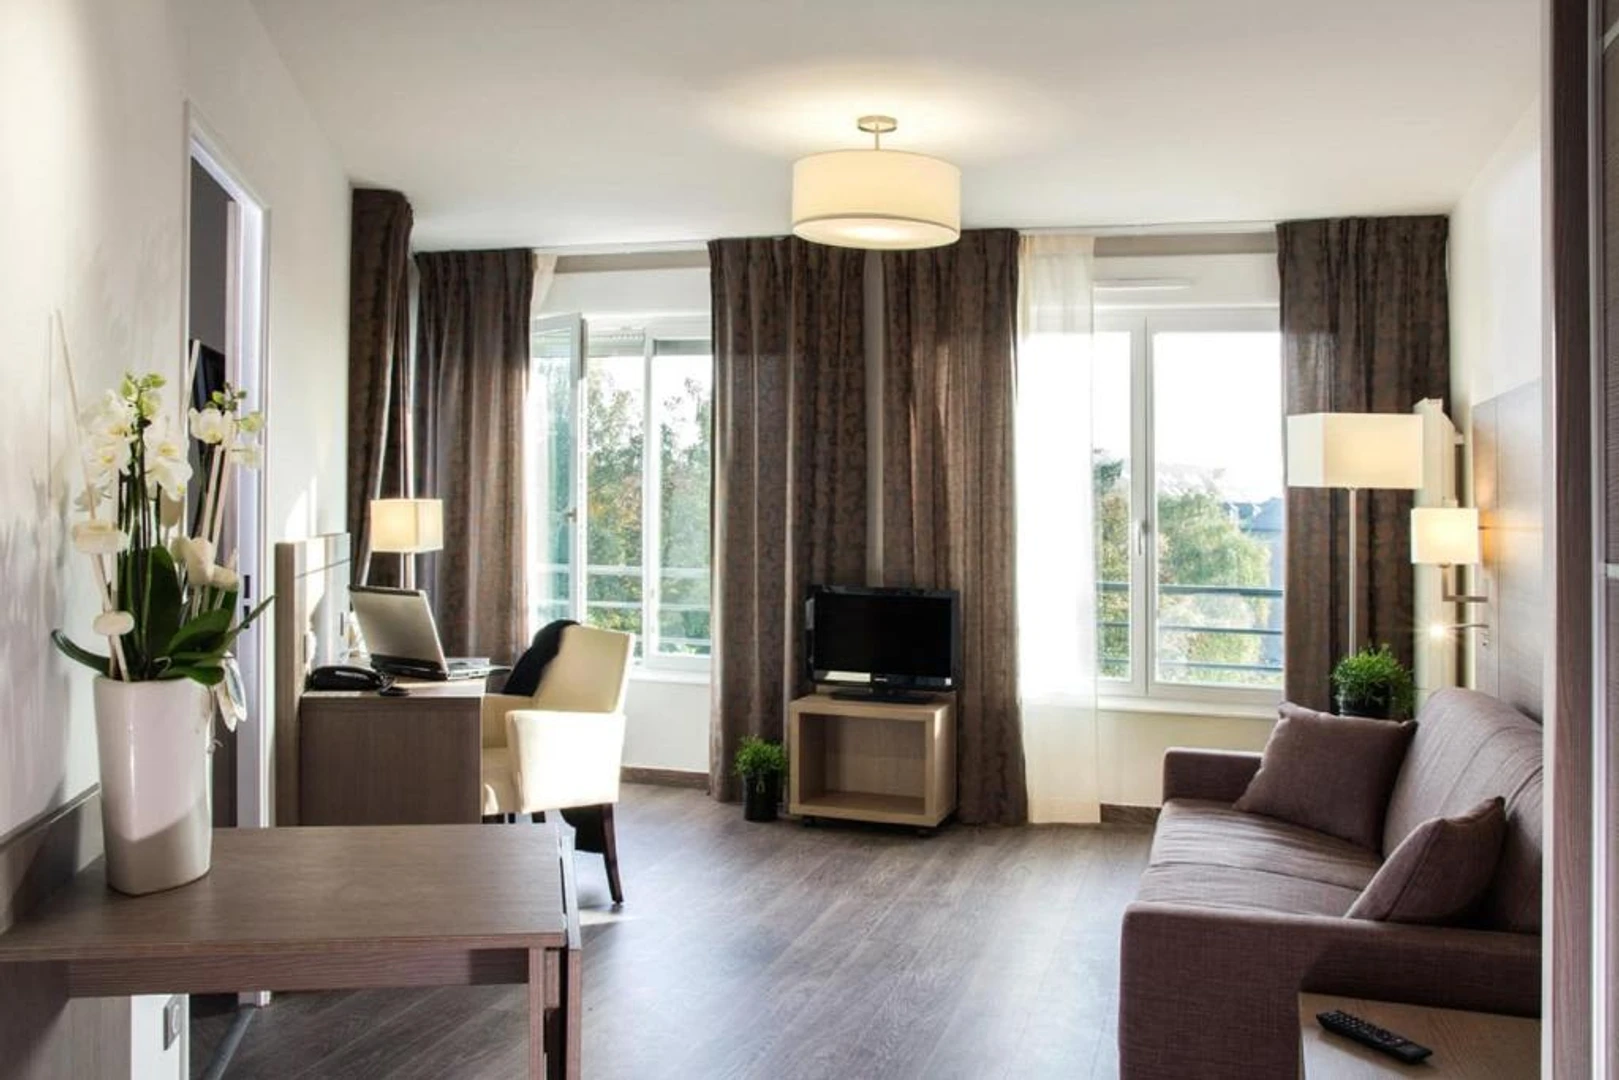 Accommodation in the centre of Valenciennes